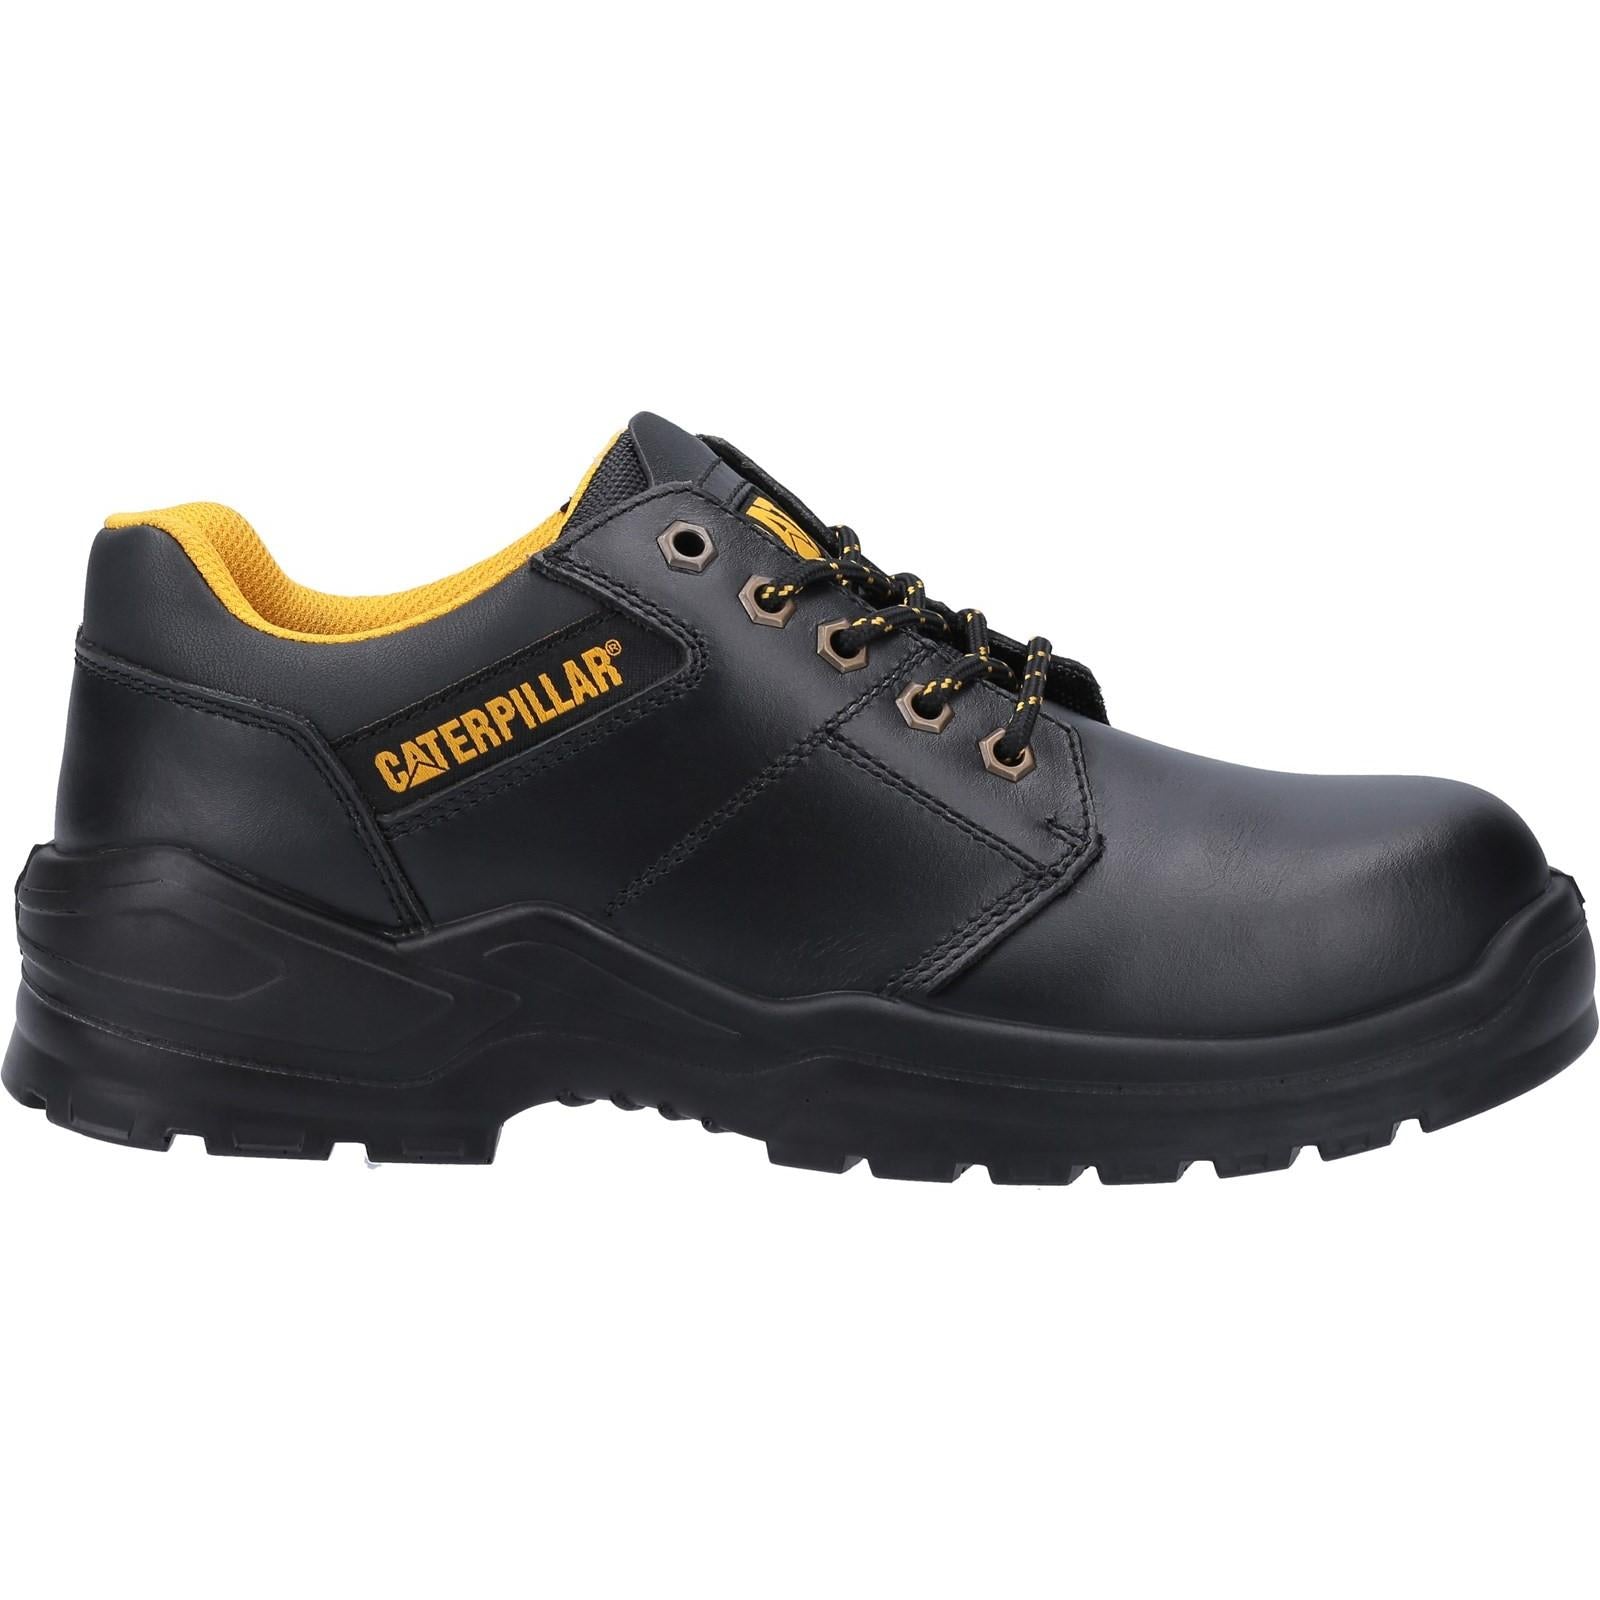 Cat Striver Low S3 Safety Shoe